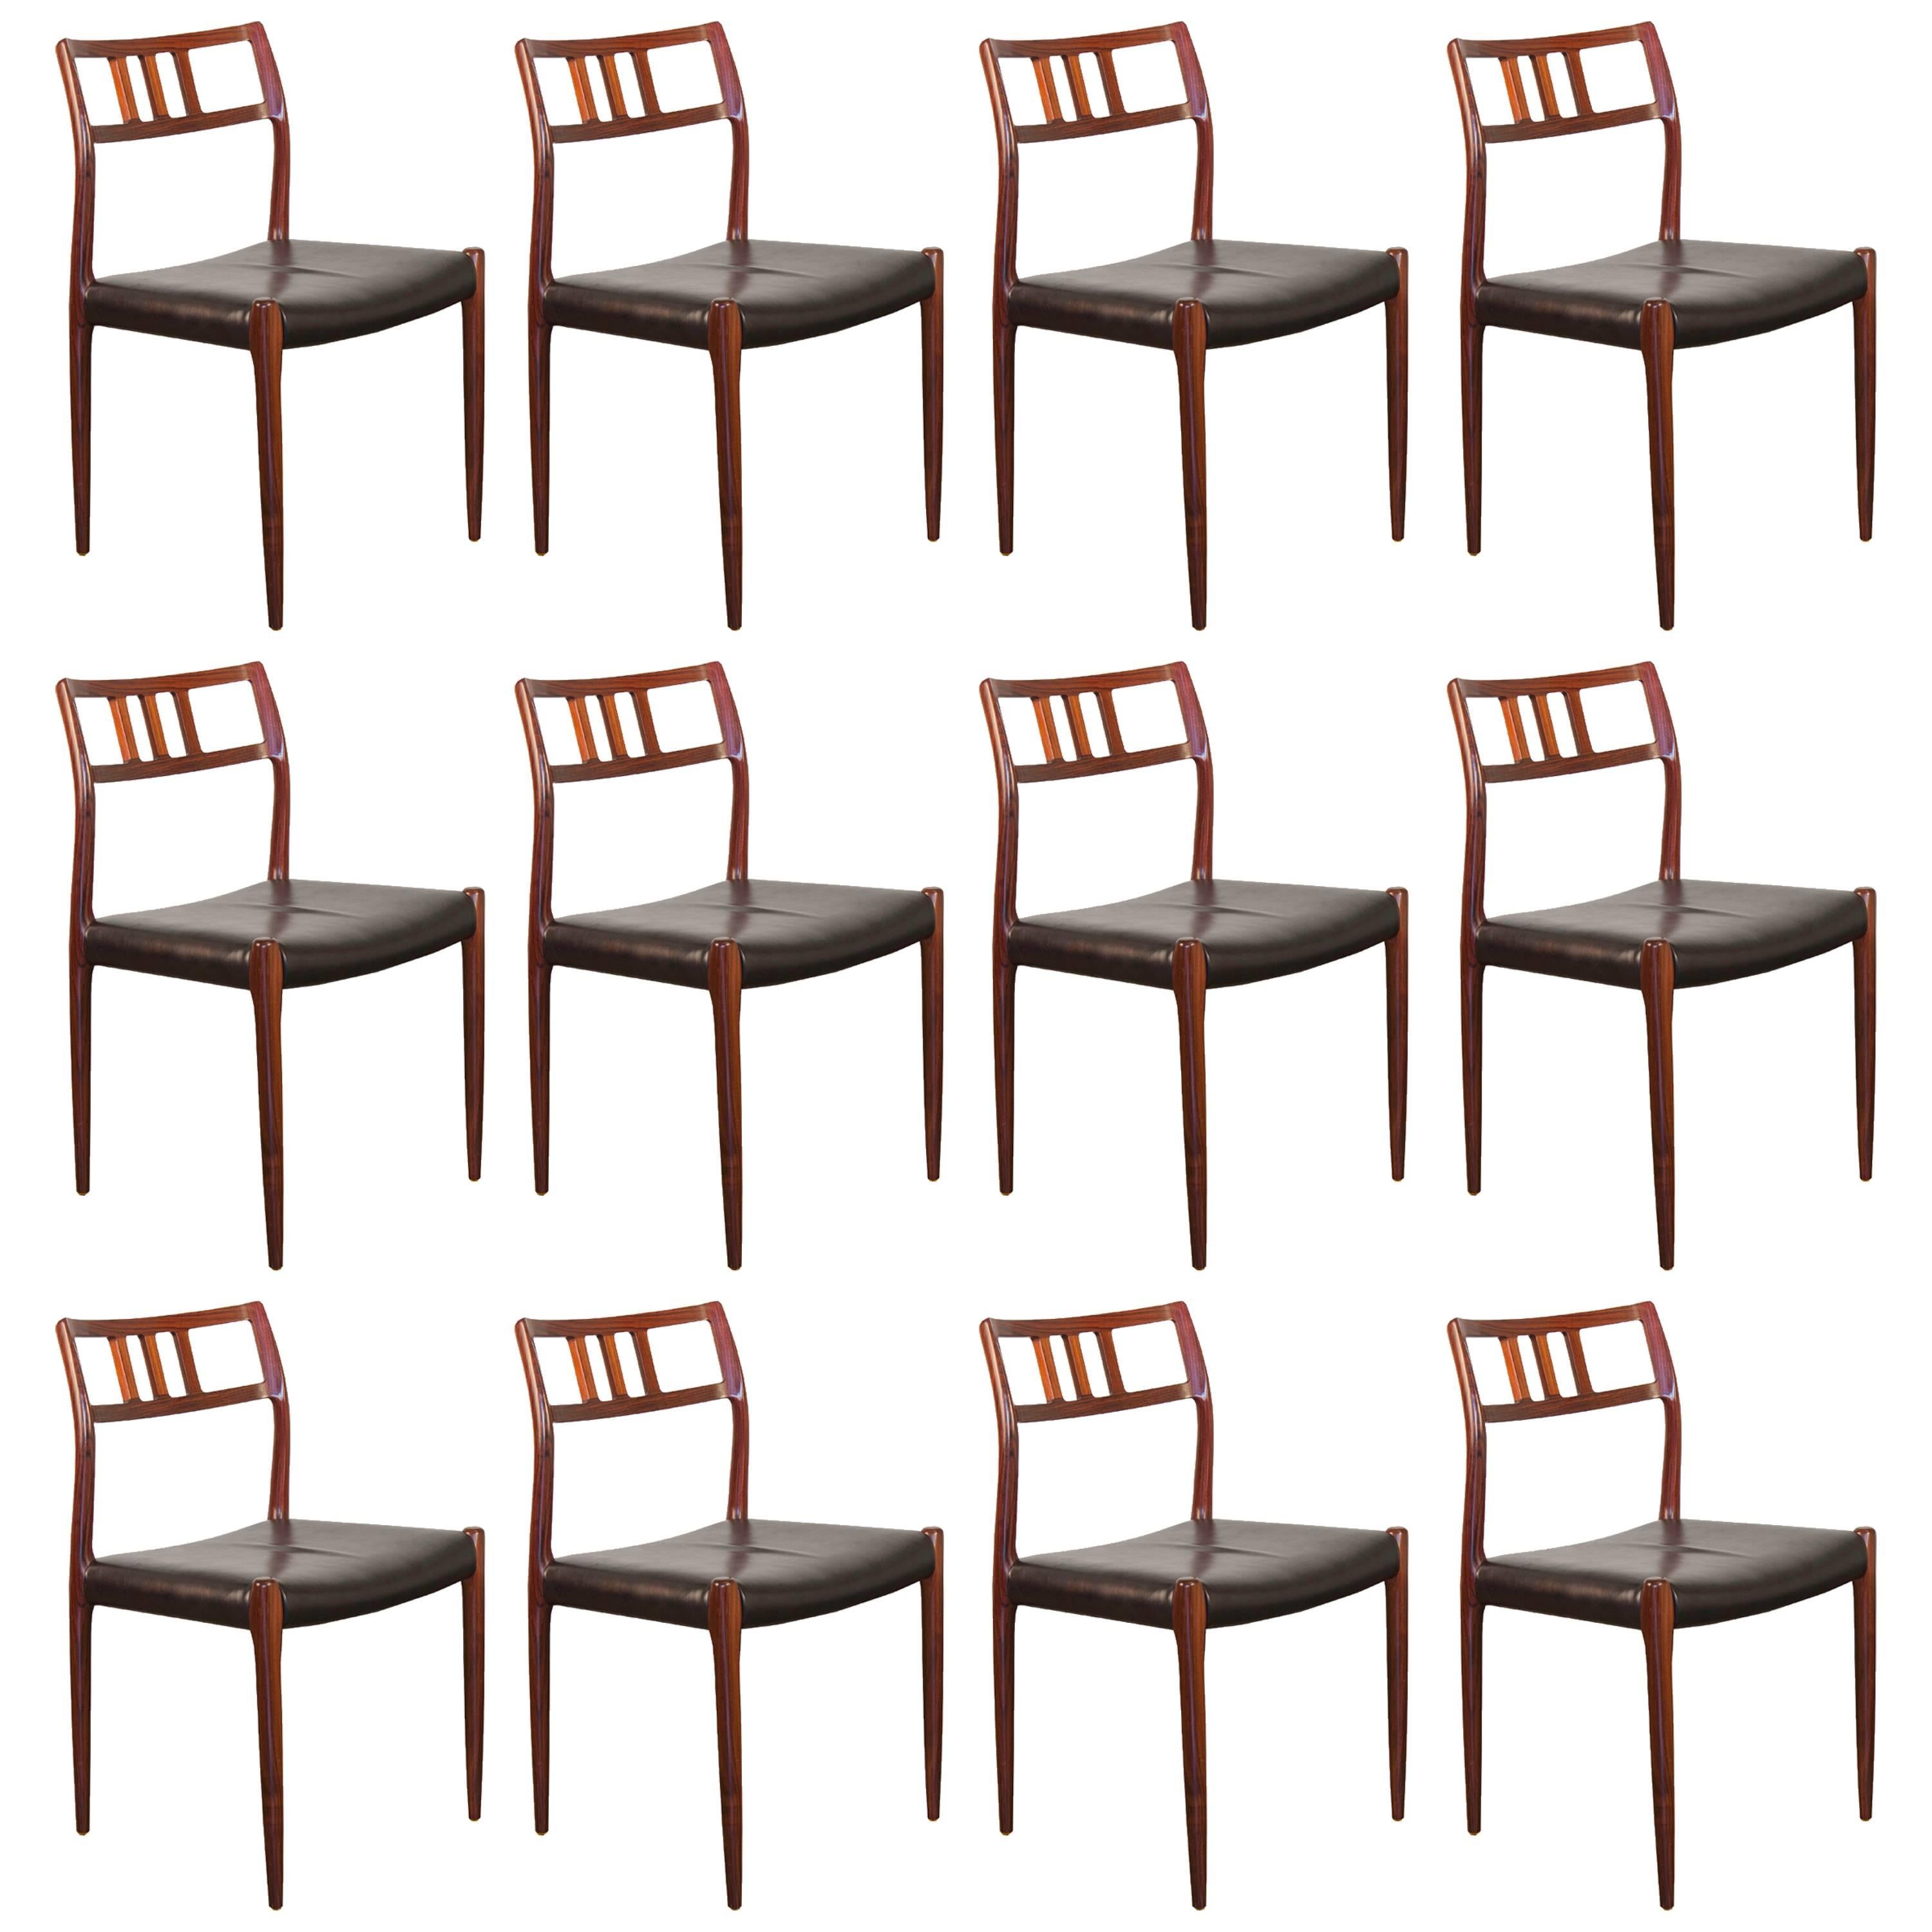 12 Rosewood Møller Dining Chairs